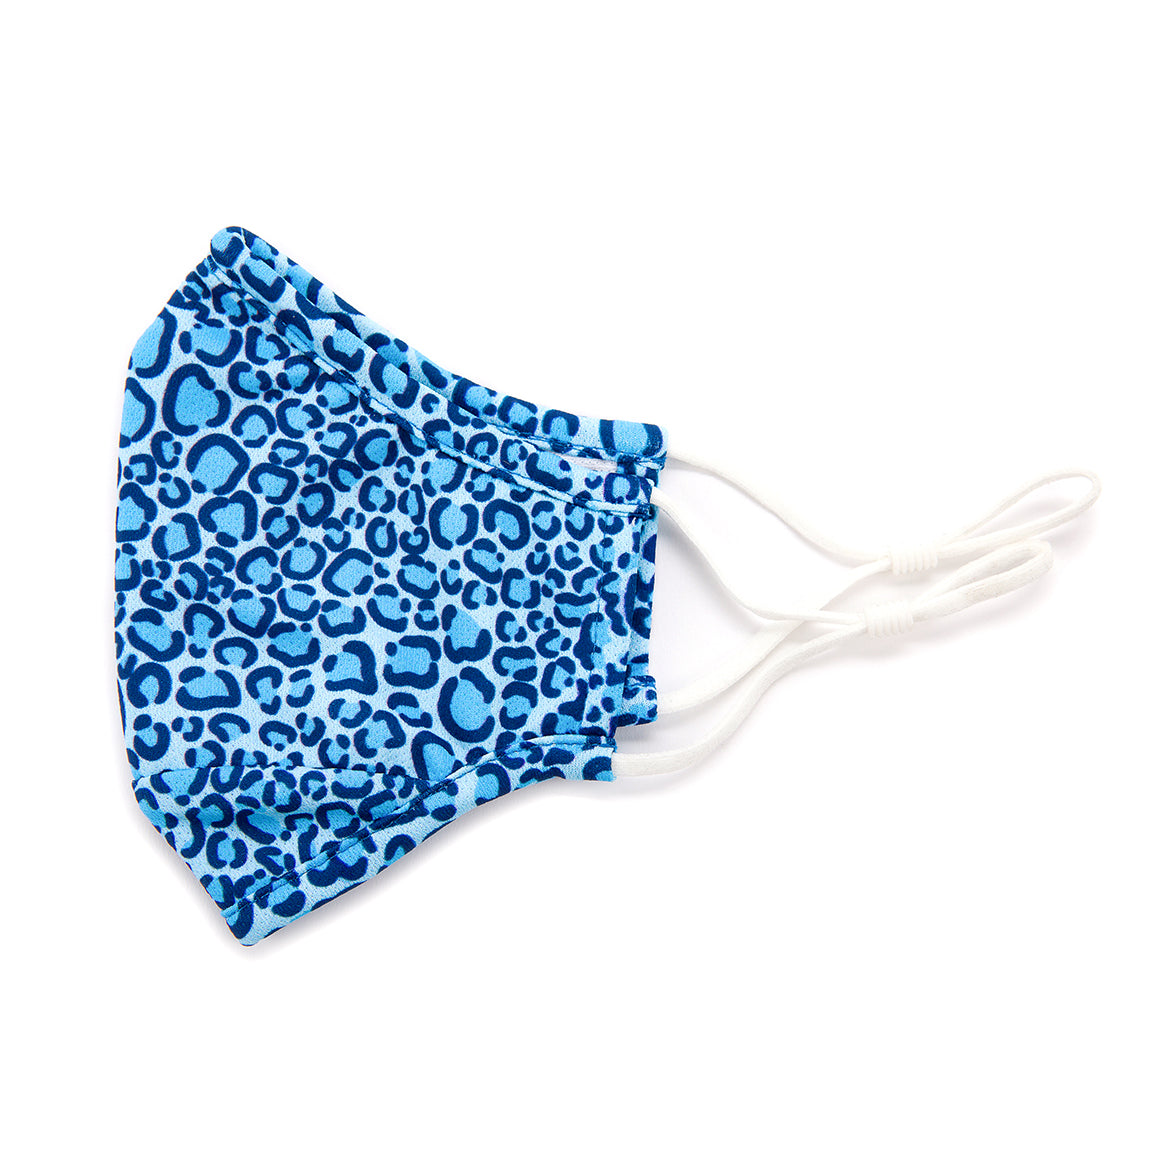 blue and navy leopard pattern face mask with white elastic straps